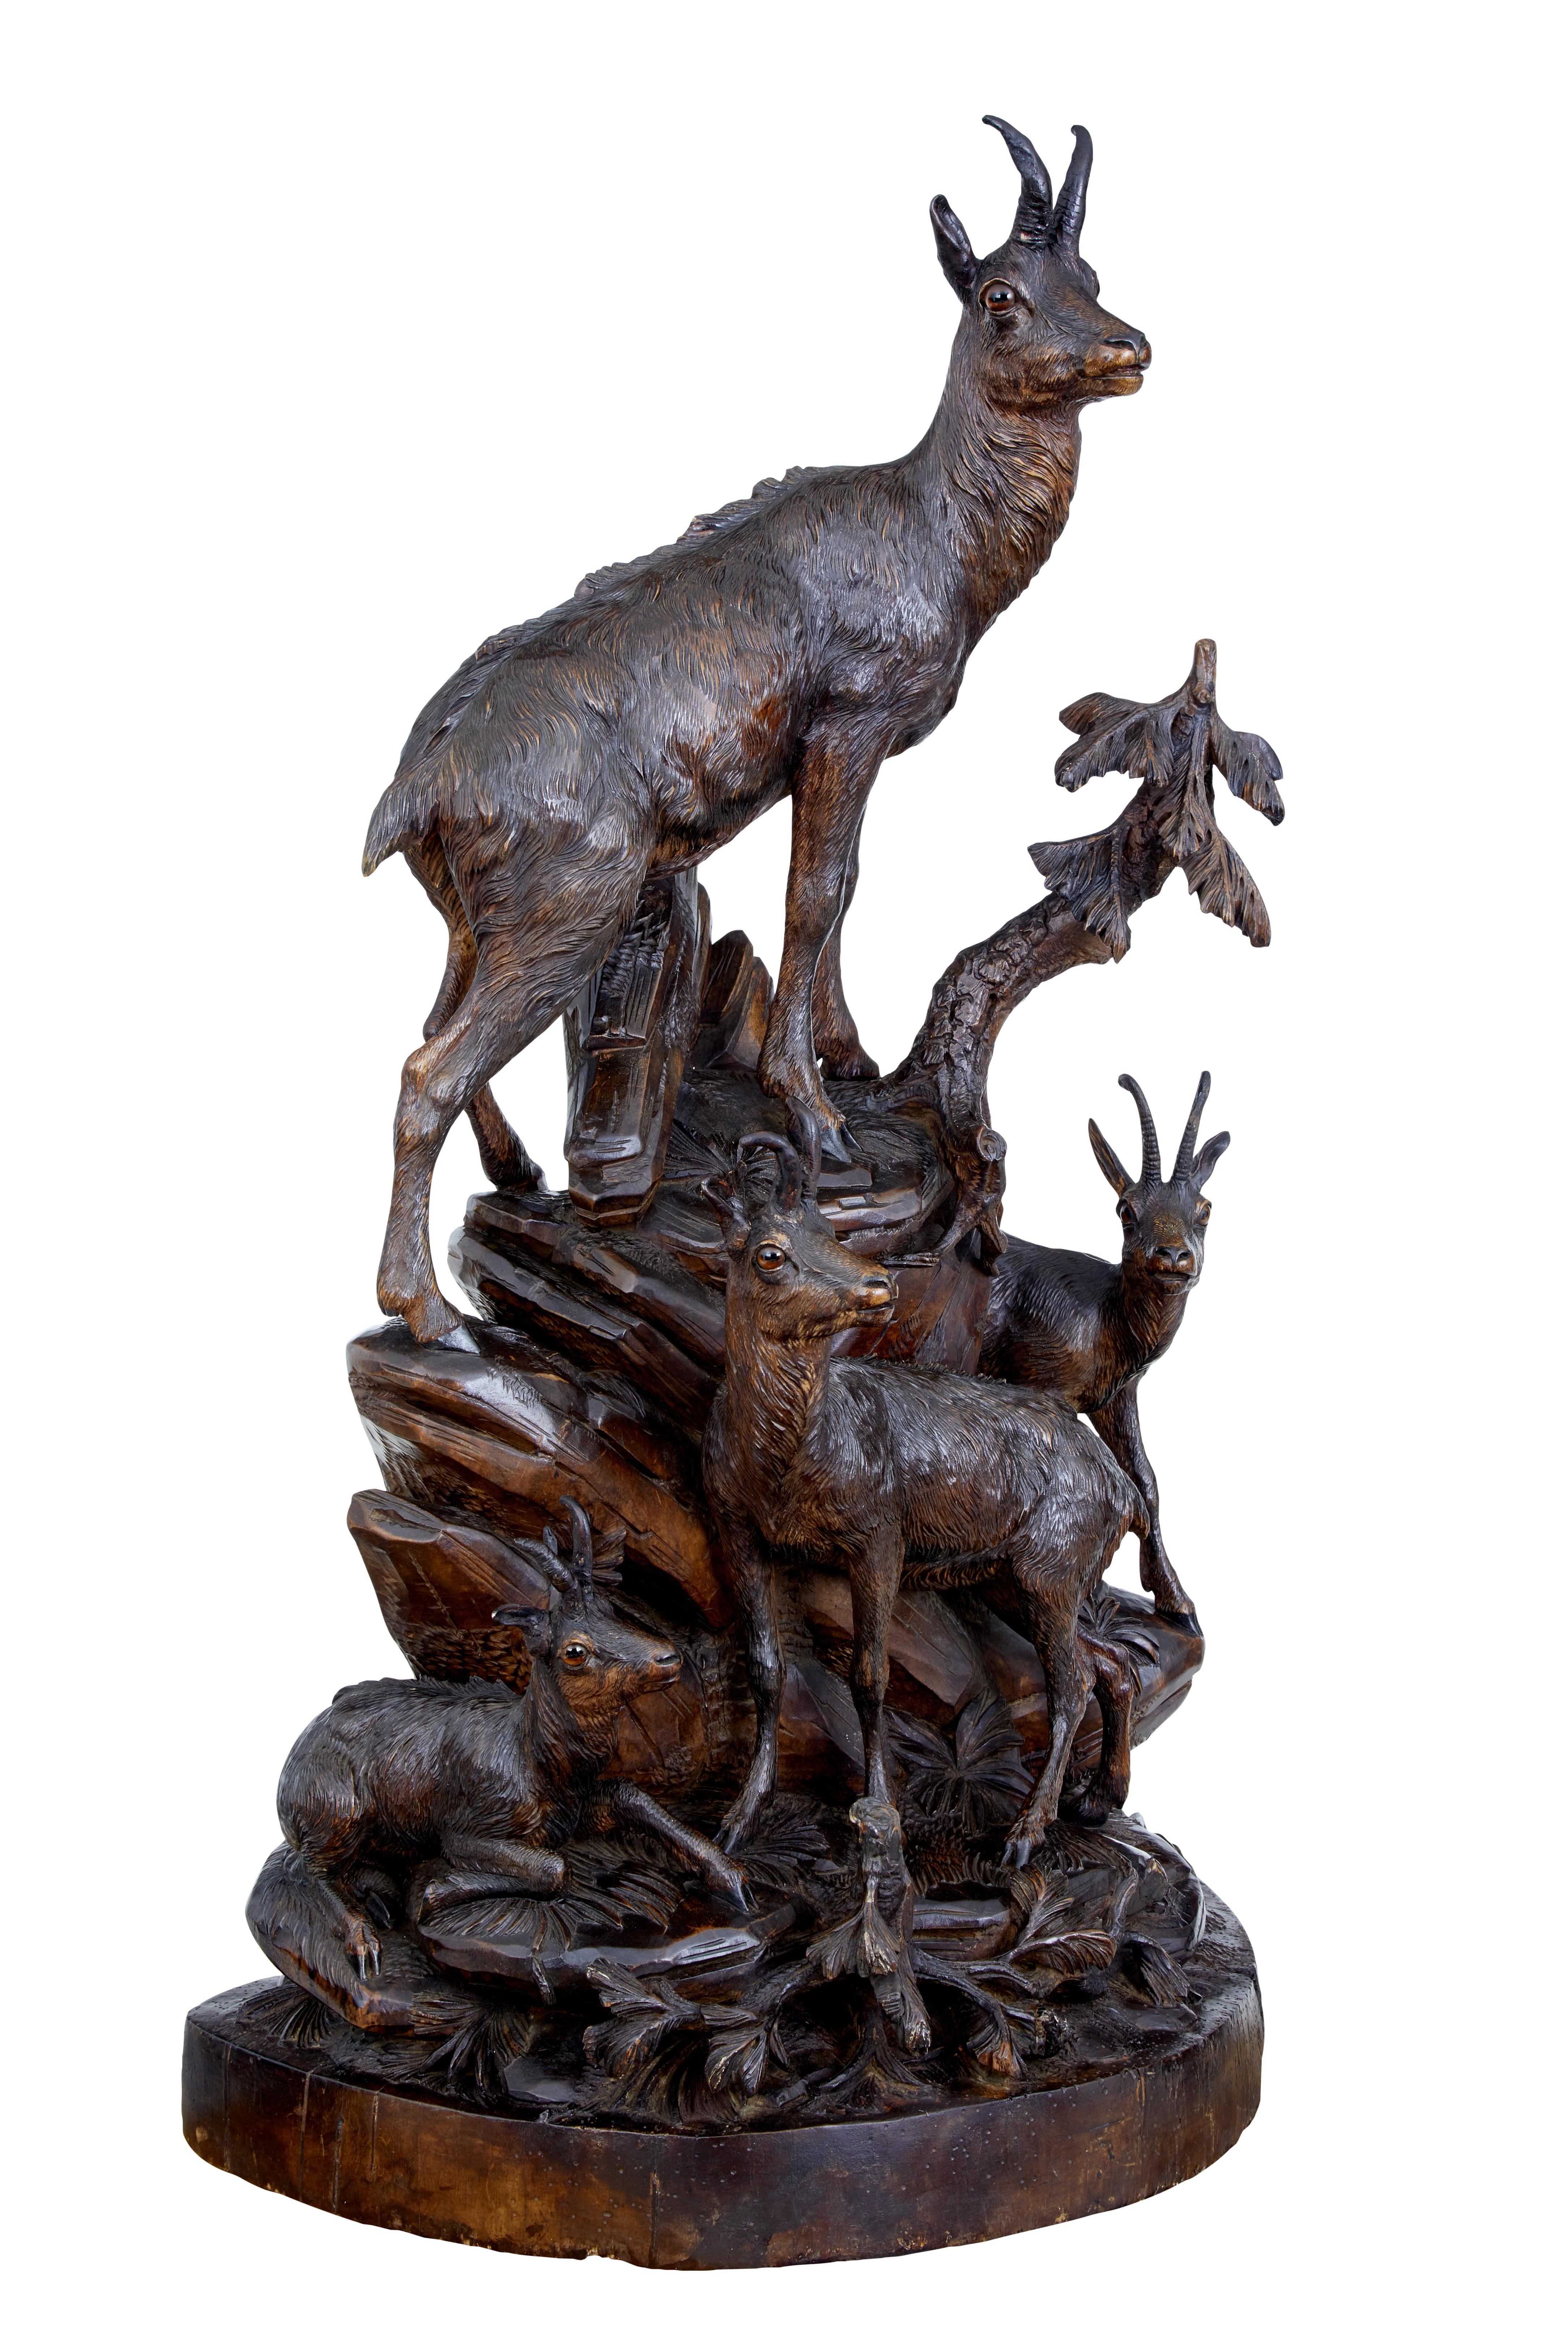 Fantastic Black Forest carving on impressive proportions, circa 1890.

Features European ibex of varying age and scale standing on carved rocks and foliage. We have owned many Black Forest sculptures but none of this scale and detail.

Original